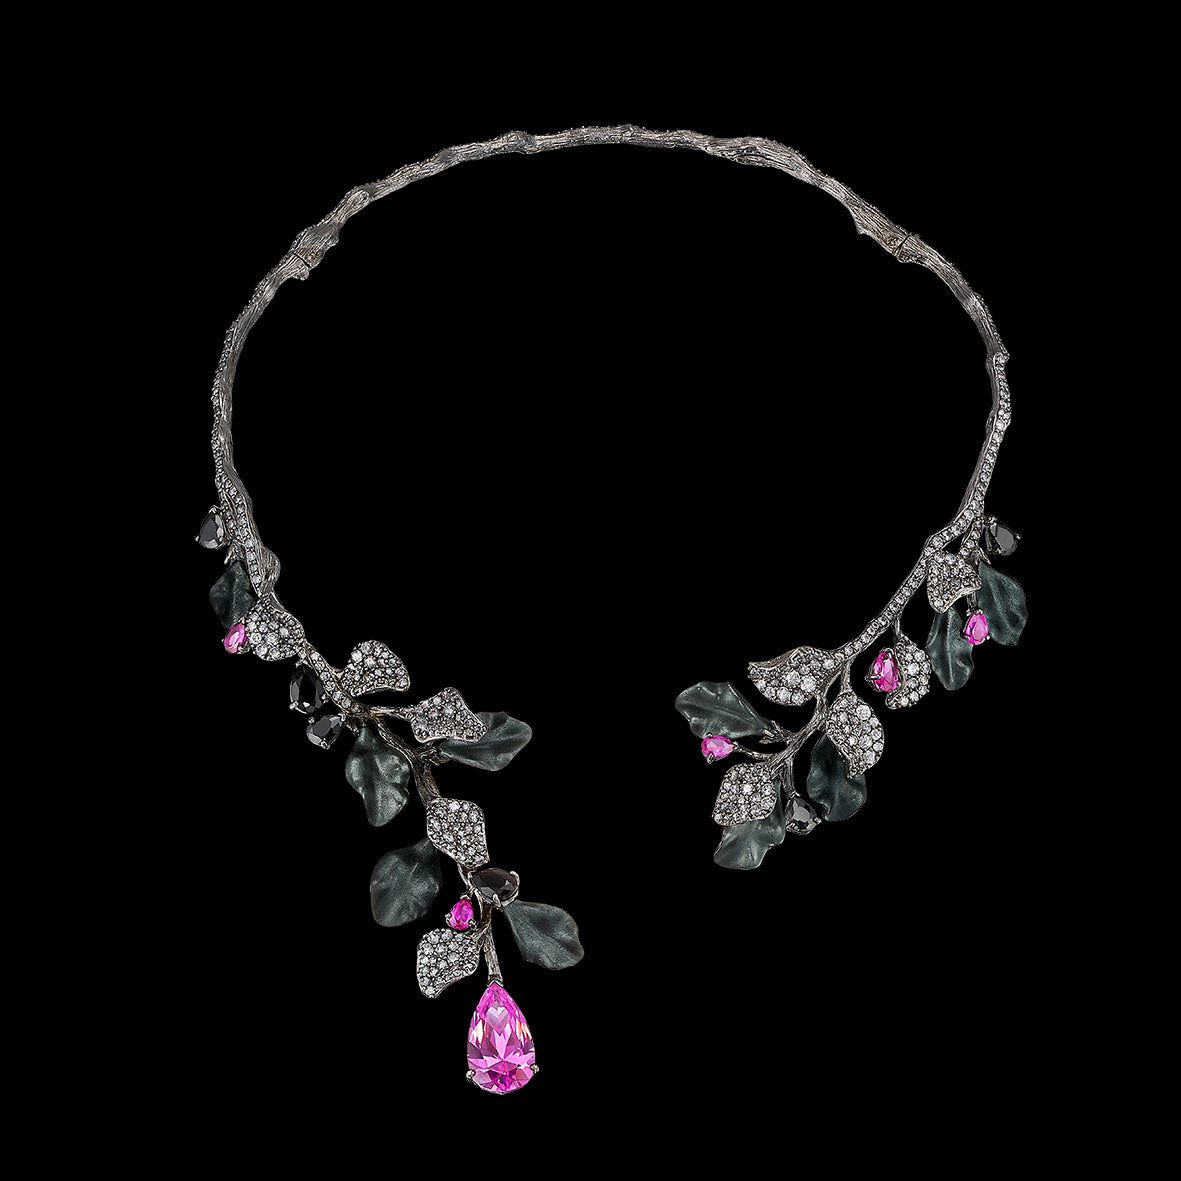 Black Diamond Fuchsia Thea Collar, Necklace, Anabela Chan Joaillerie - Fine jewelry with laboratory grown and created gemstones hand-crafted in the United Kingdom. Anabela Chan Joaillerie is the first fine jewellery brand in the world to champion laboratory-grown and created gemstones with high jewellery design, artisanal craftsmanship and a focus on ethical and sustainable innovations.